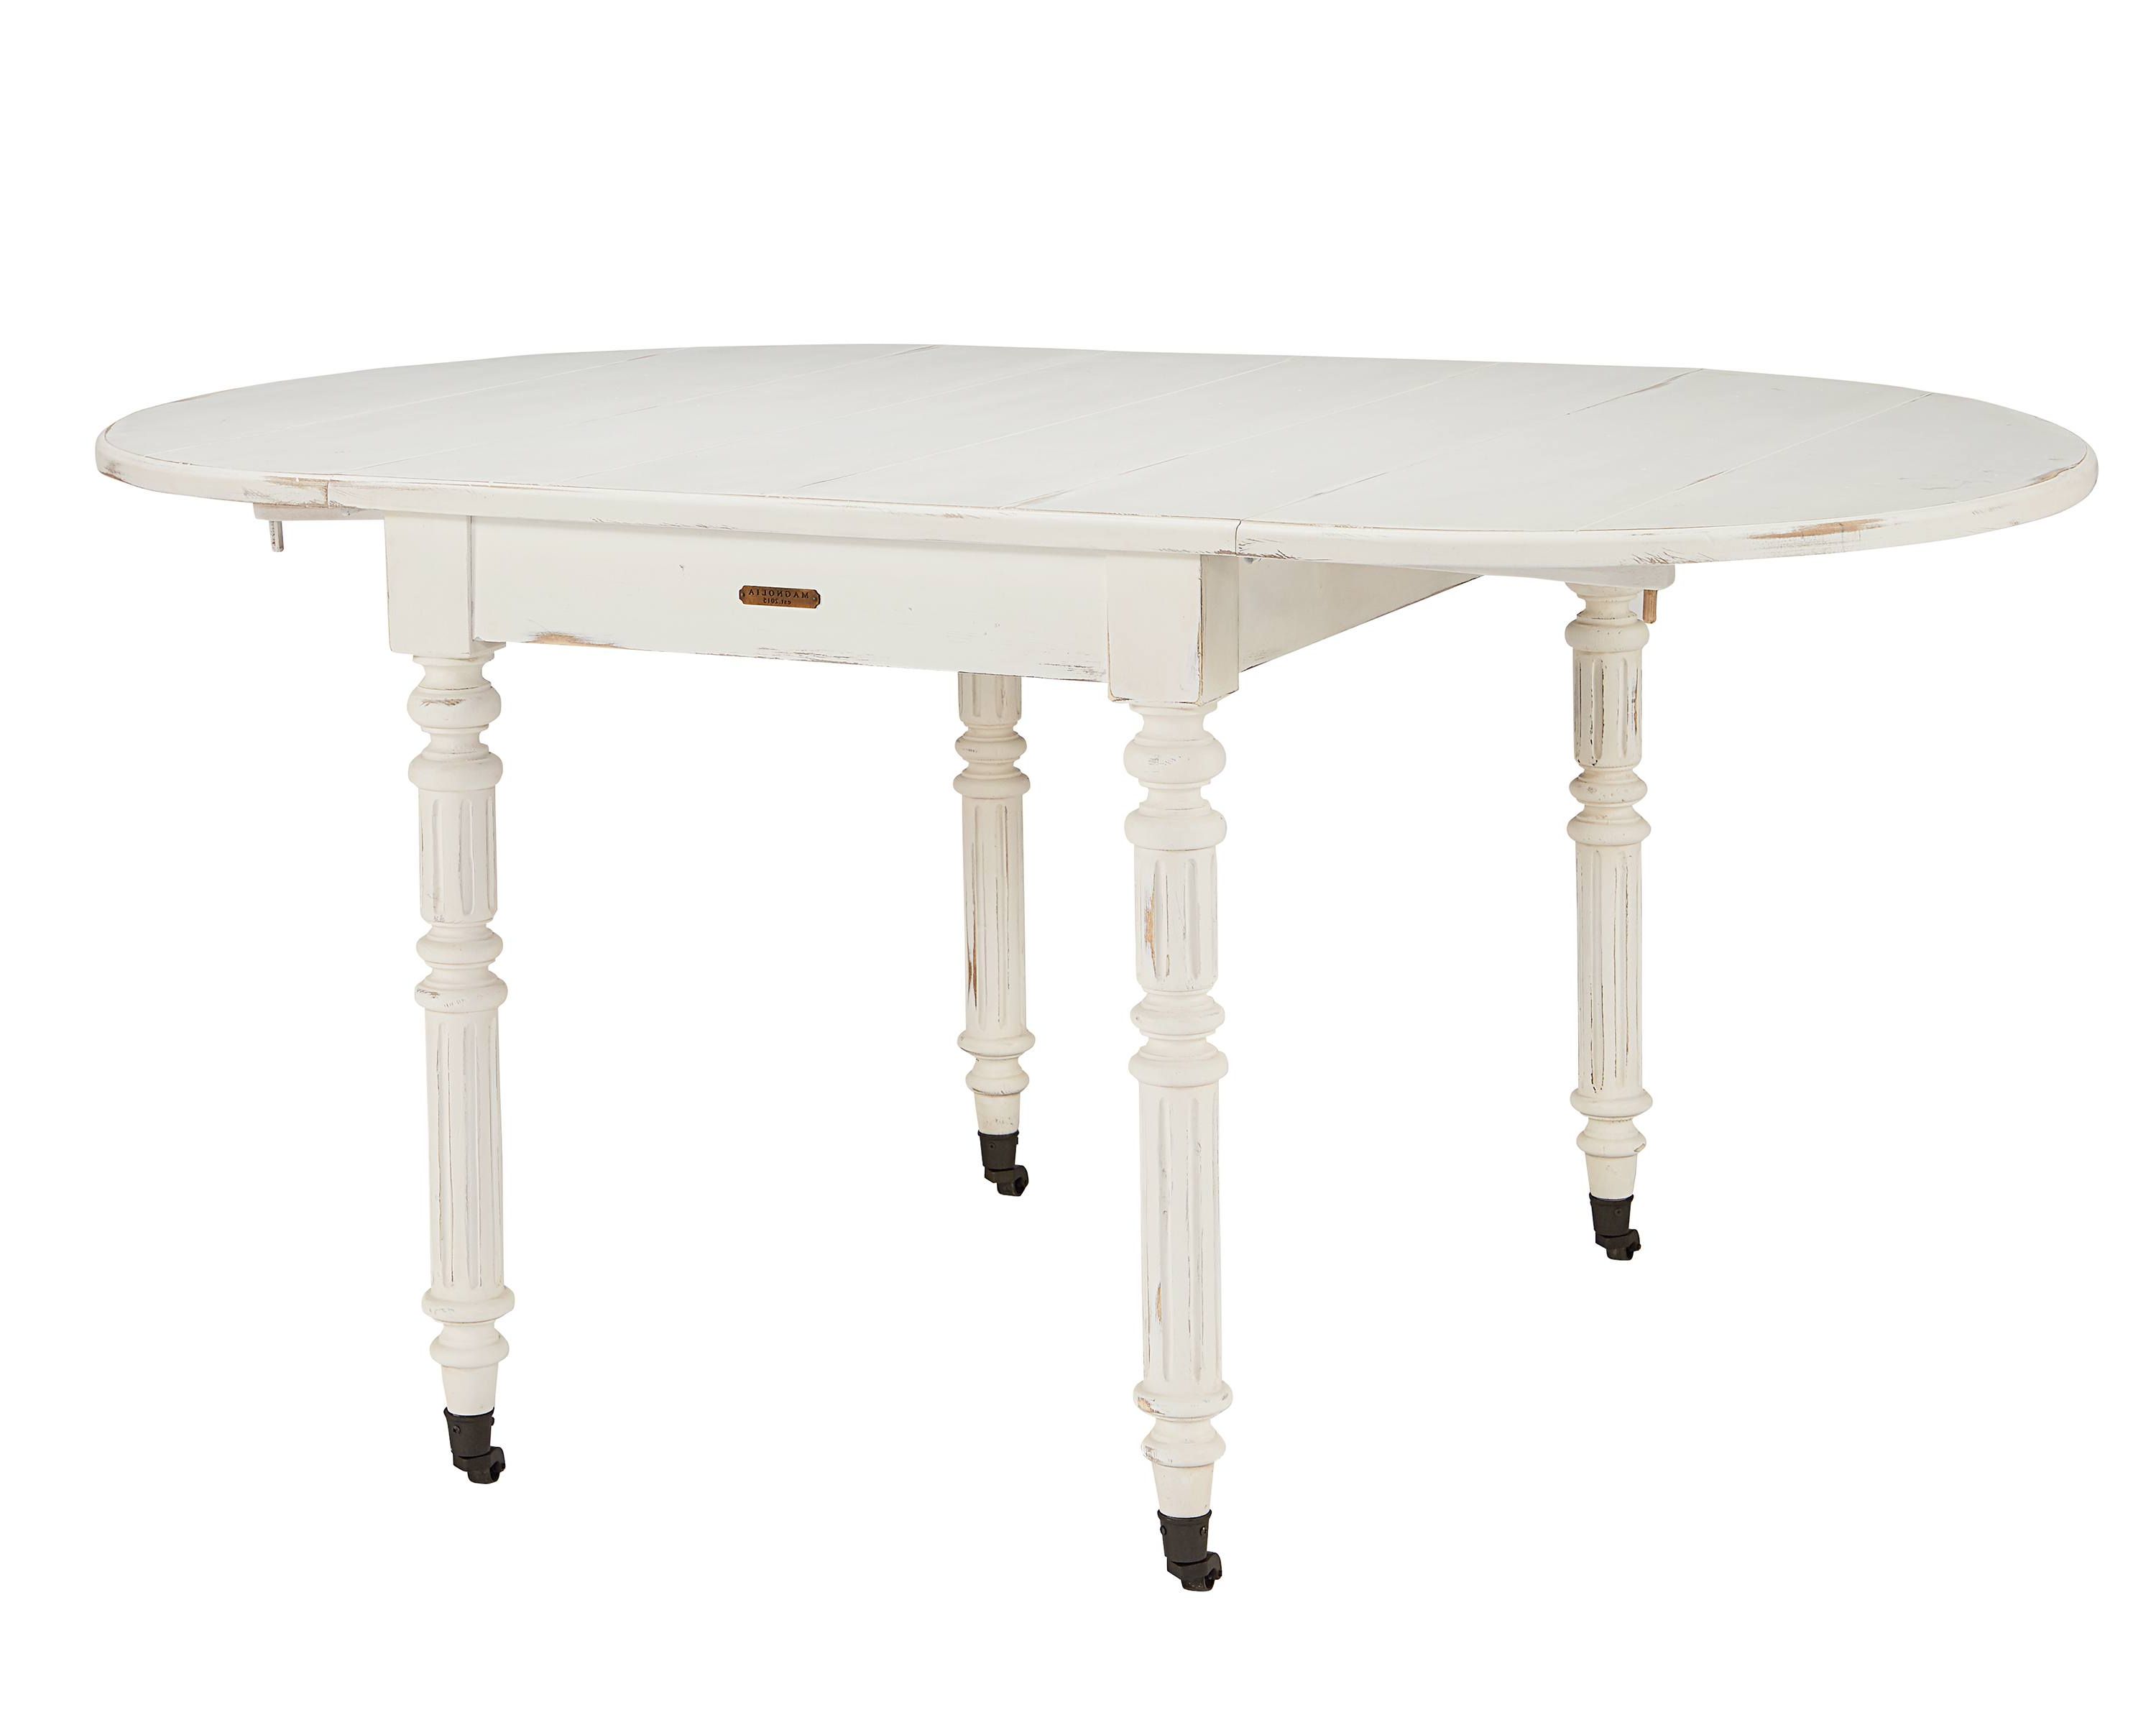 Windsor Oval Dining Table – Magnolia Home With Regard To Preferred Magnolia Home Ellipse Cocktail Tables By Joanna Gaines (View 2 of 20)